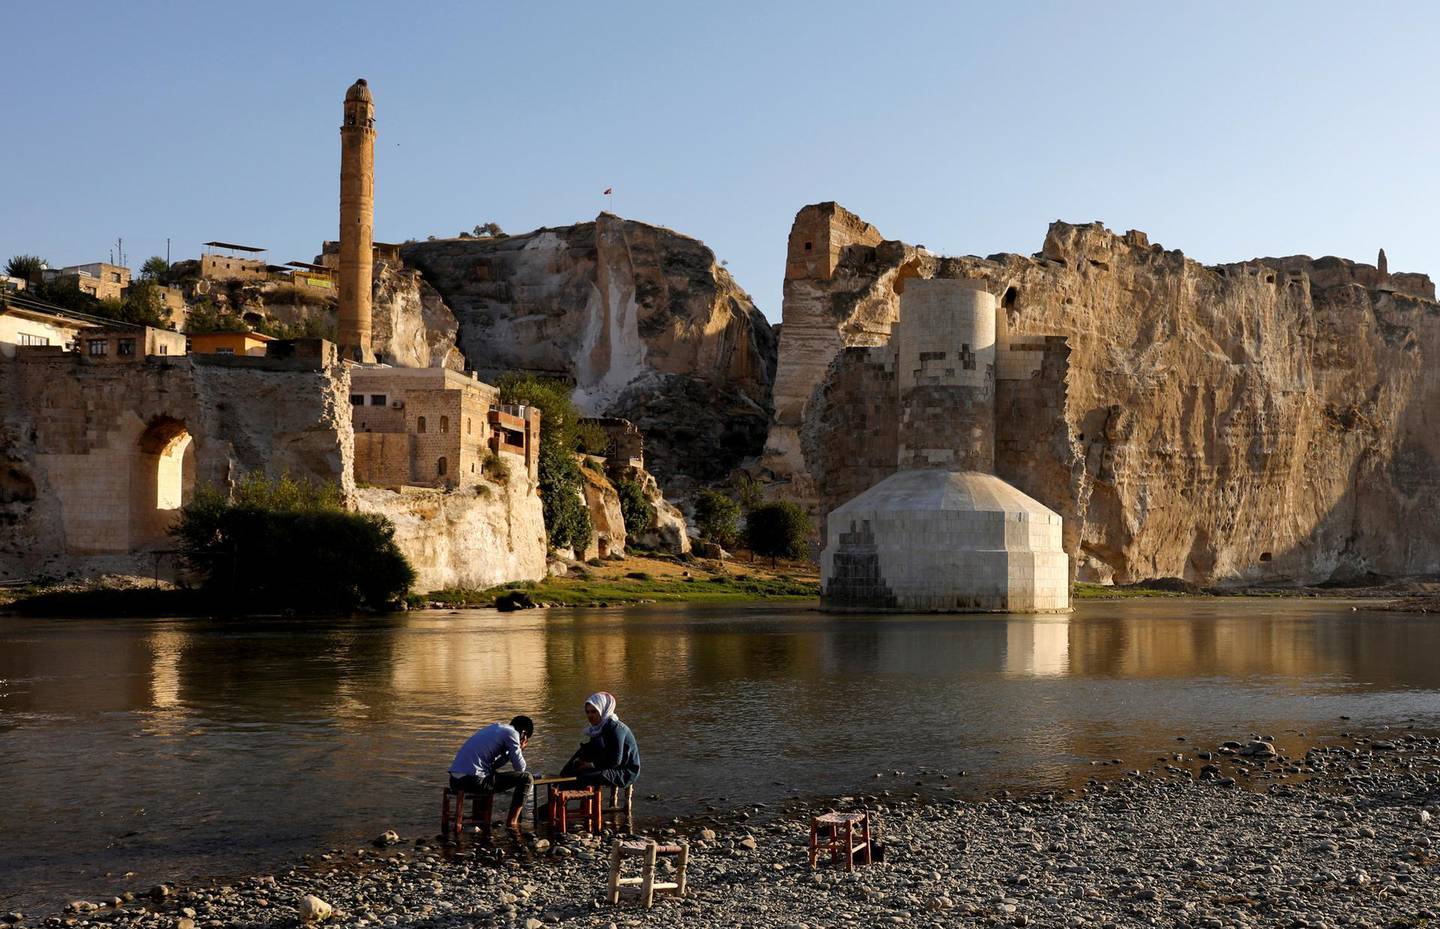 FILE PHOTO: The Tigris river flows through the ancient town of Hasankeyf, which will be submerged by the Ilisu dam in southeastern Turkey, September 27, 2017. REUTERS/Umit Bektas/File Photo